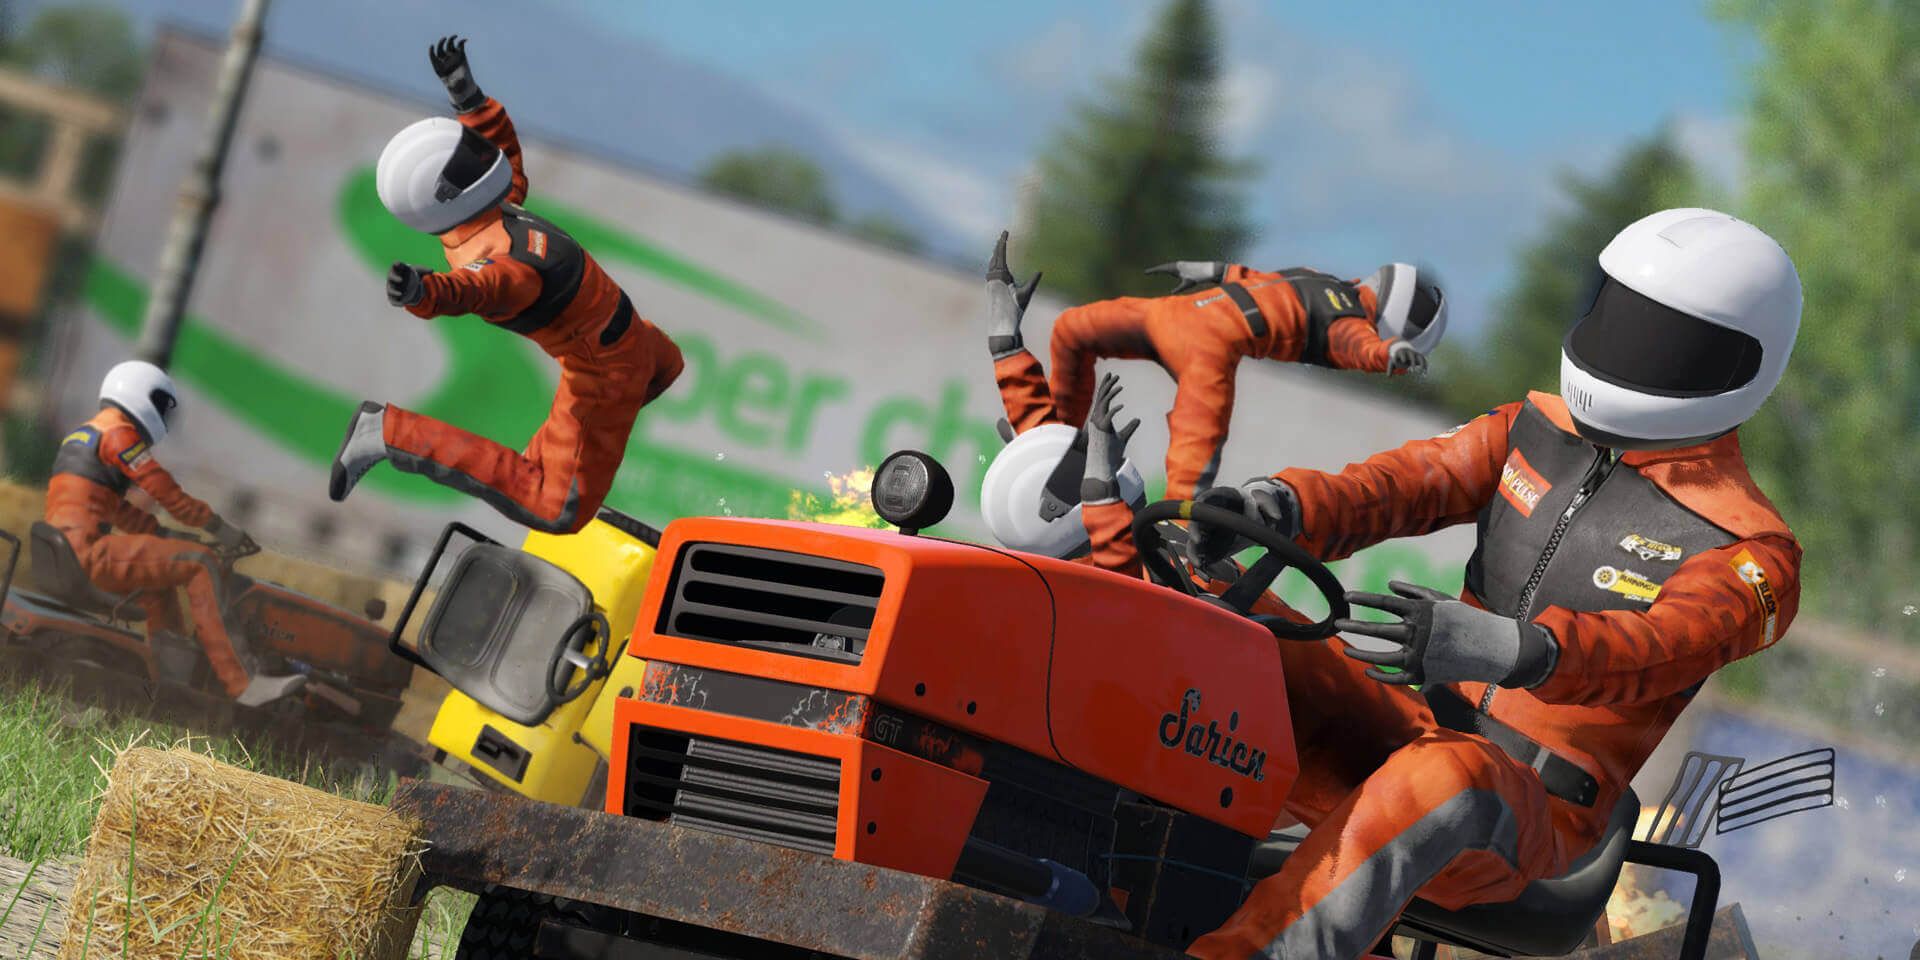 Players driving lawnmowers in Wreckfest